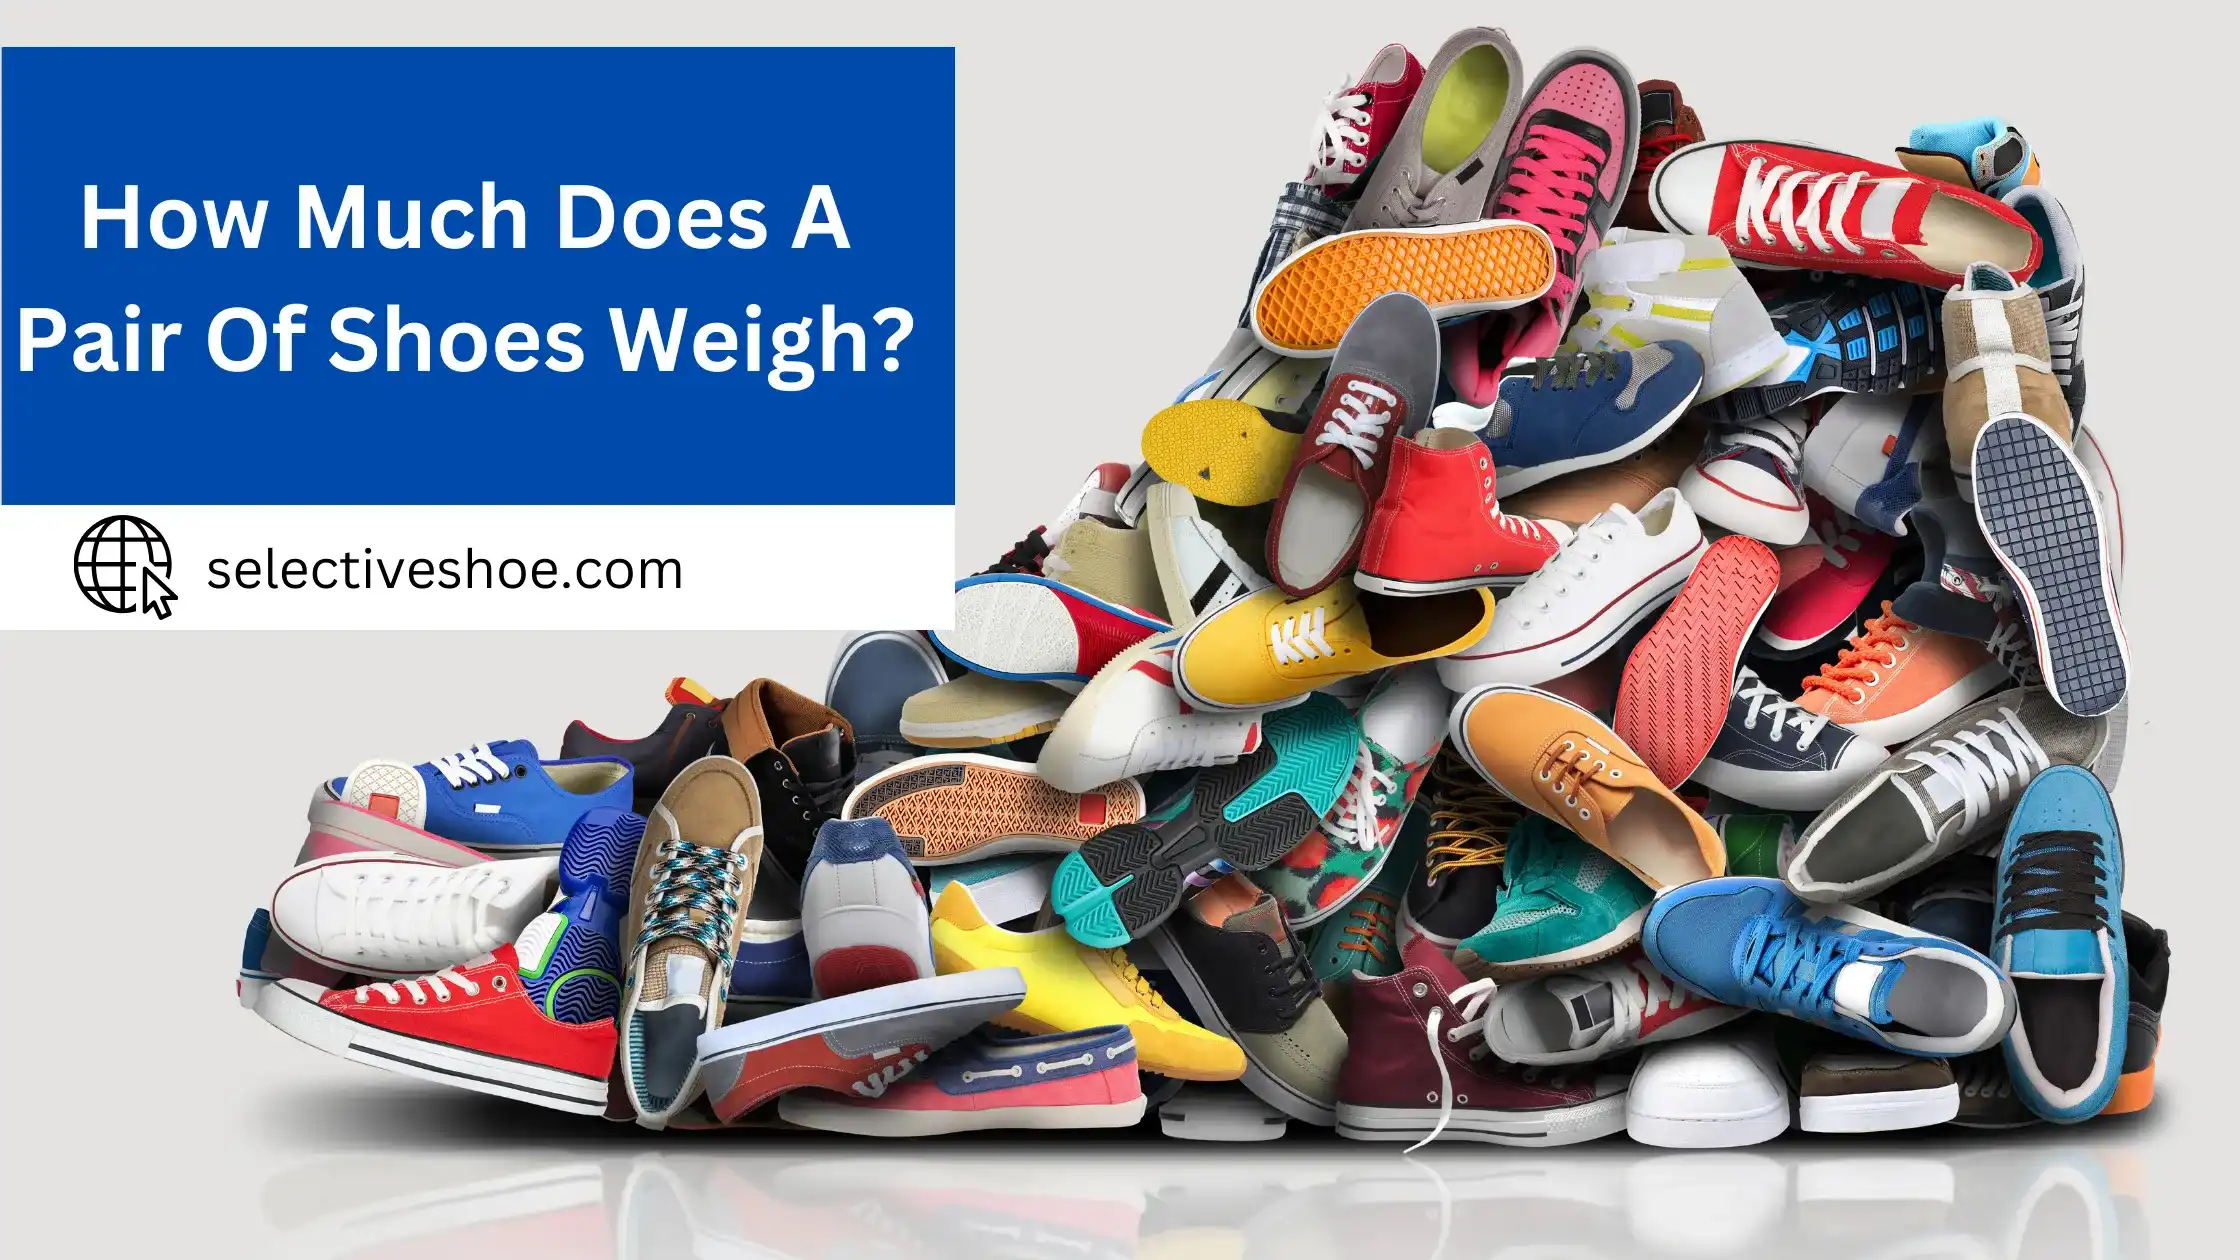 How Much Does a Pair of Shoes Weigh? Best Explained